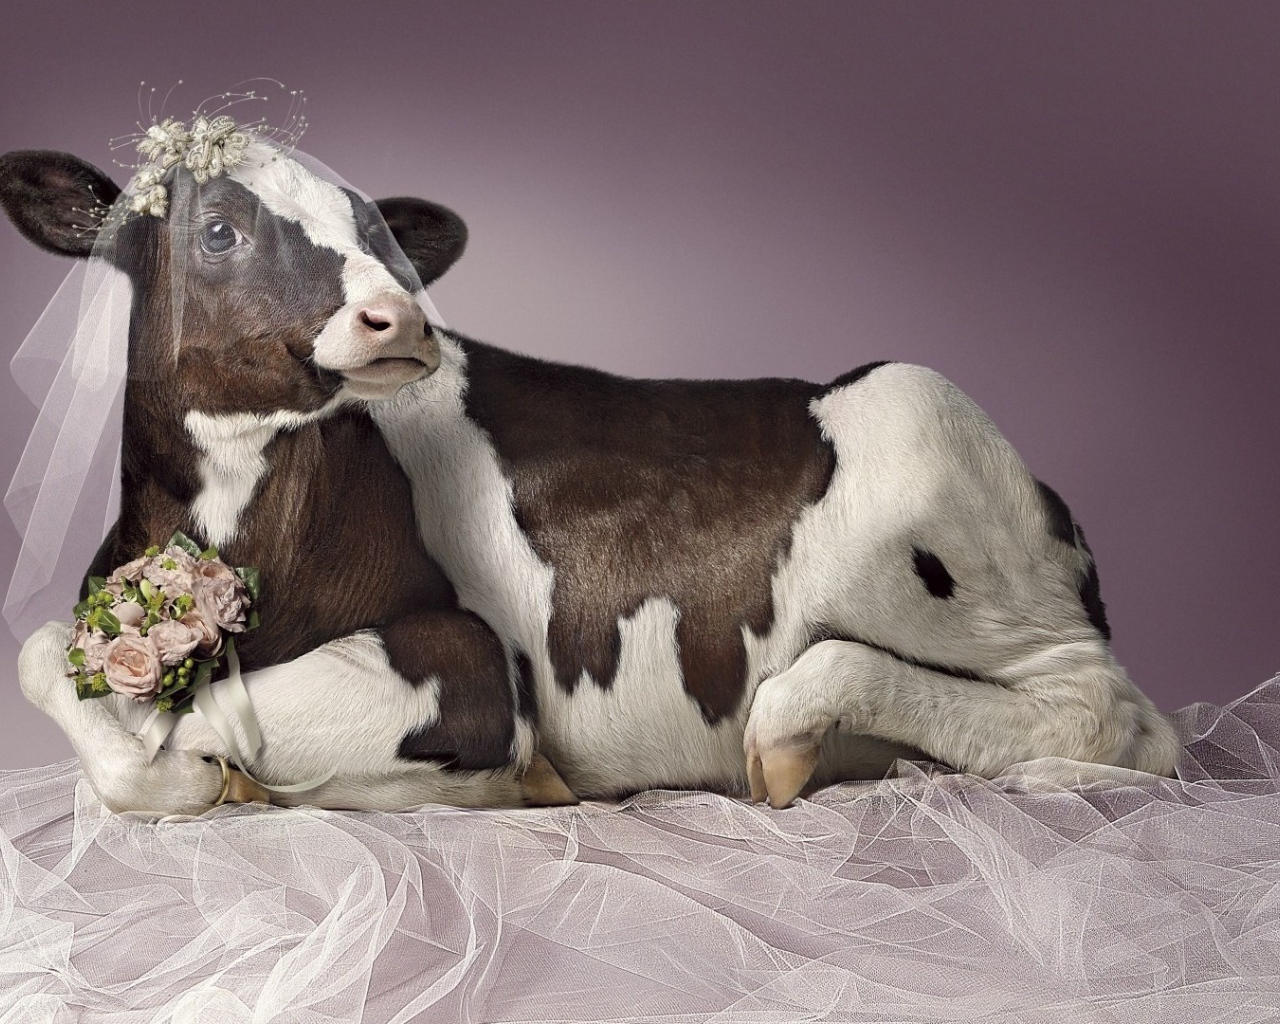 Cow in the role of the bride